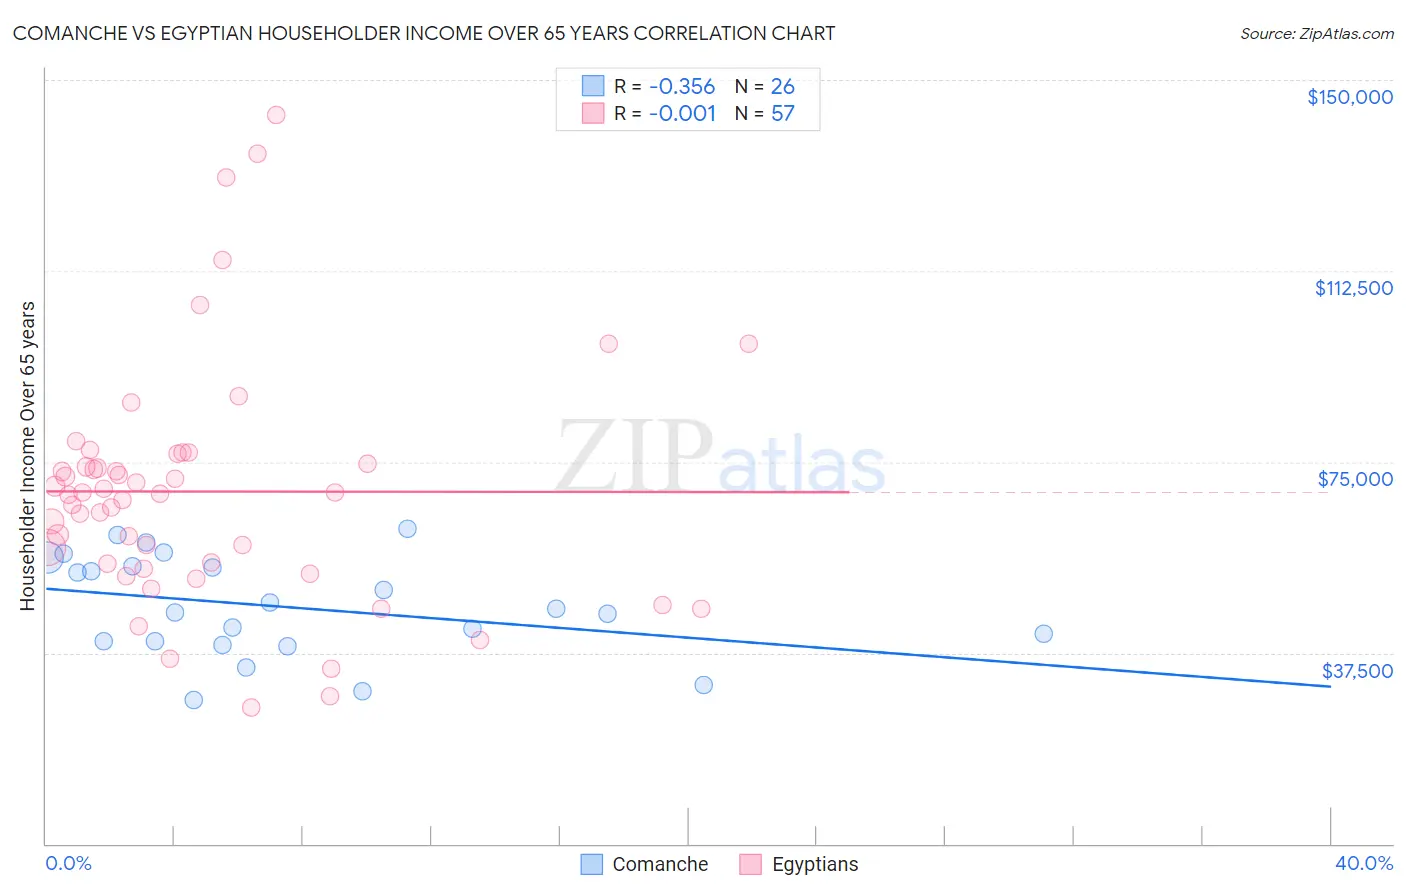 Comanche vs Egyptian Householder Income Over 65 years